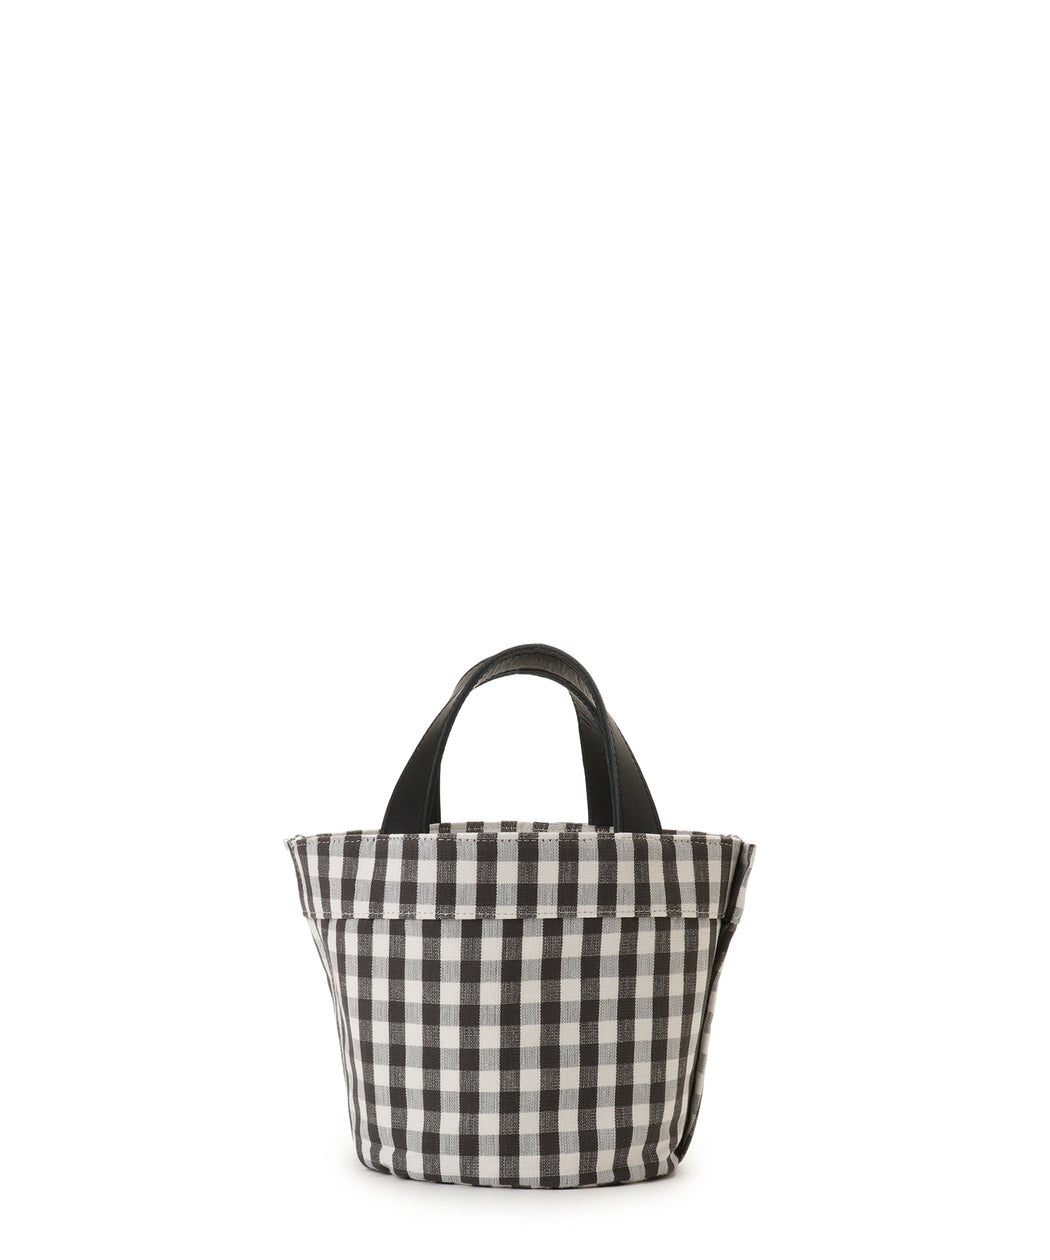 Gingham check tote XS